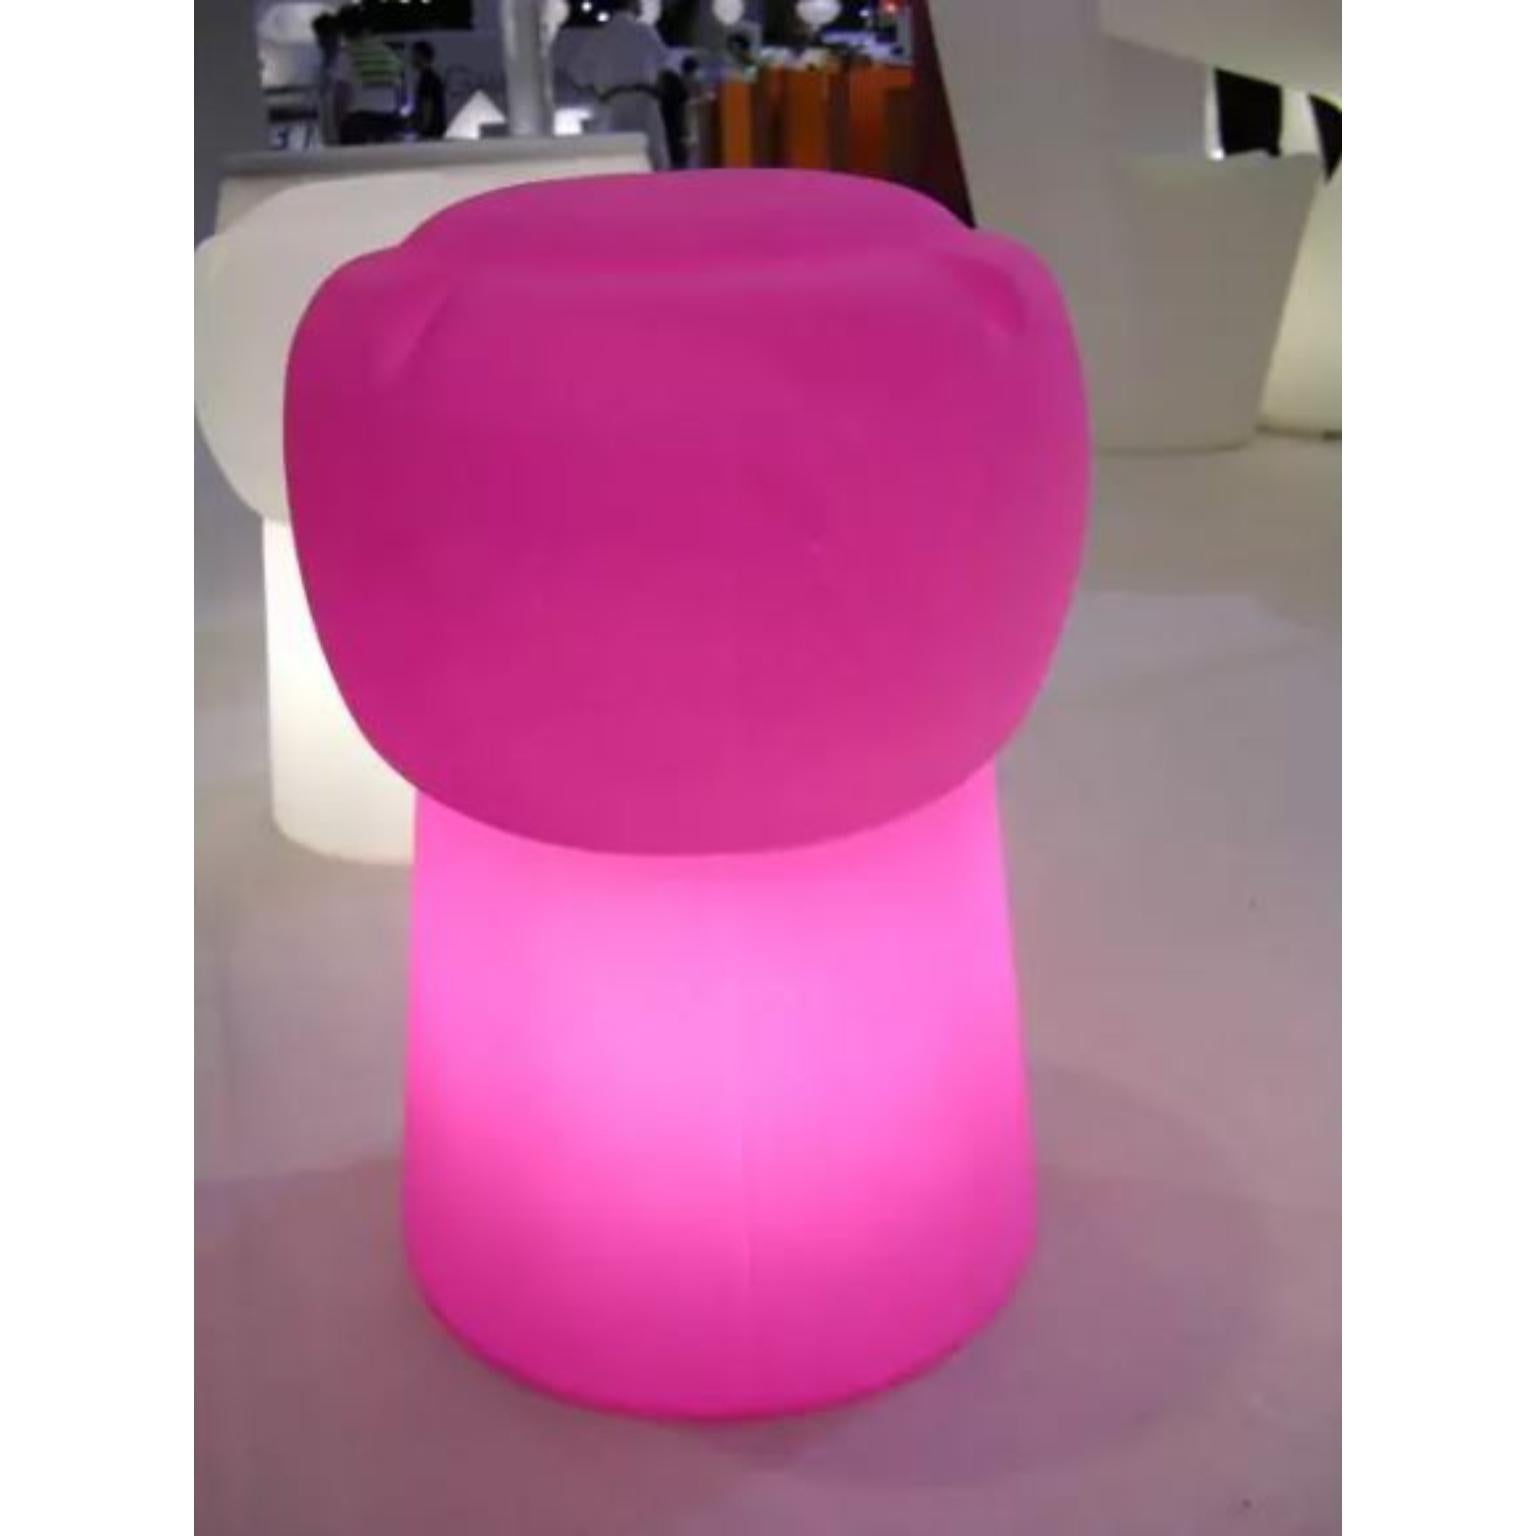 Sweet Fuchsia Cin Cin Stool by SLIDE Studio
Dimensions: Ø 32 x H 49 cm. Seat Height: 49 cm.
Materials: Polyethylene.
Weight: 2 kg.

Available in different color options. This product is suitable for indoor and outdoor use. Please contact us. 

Our